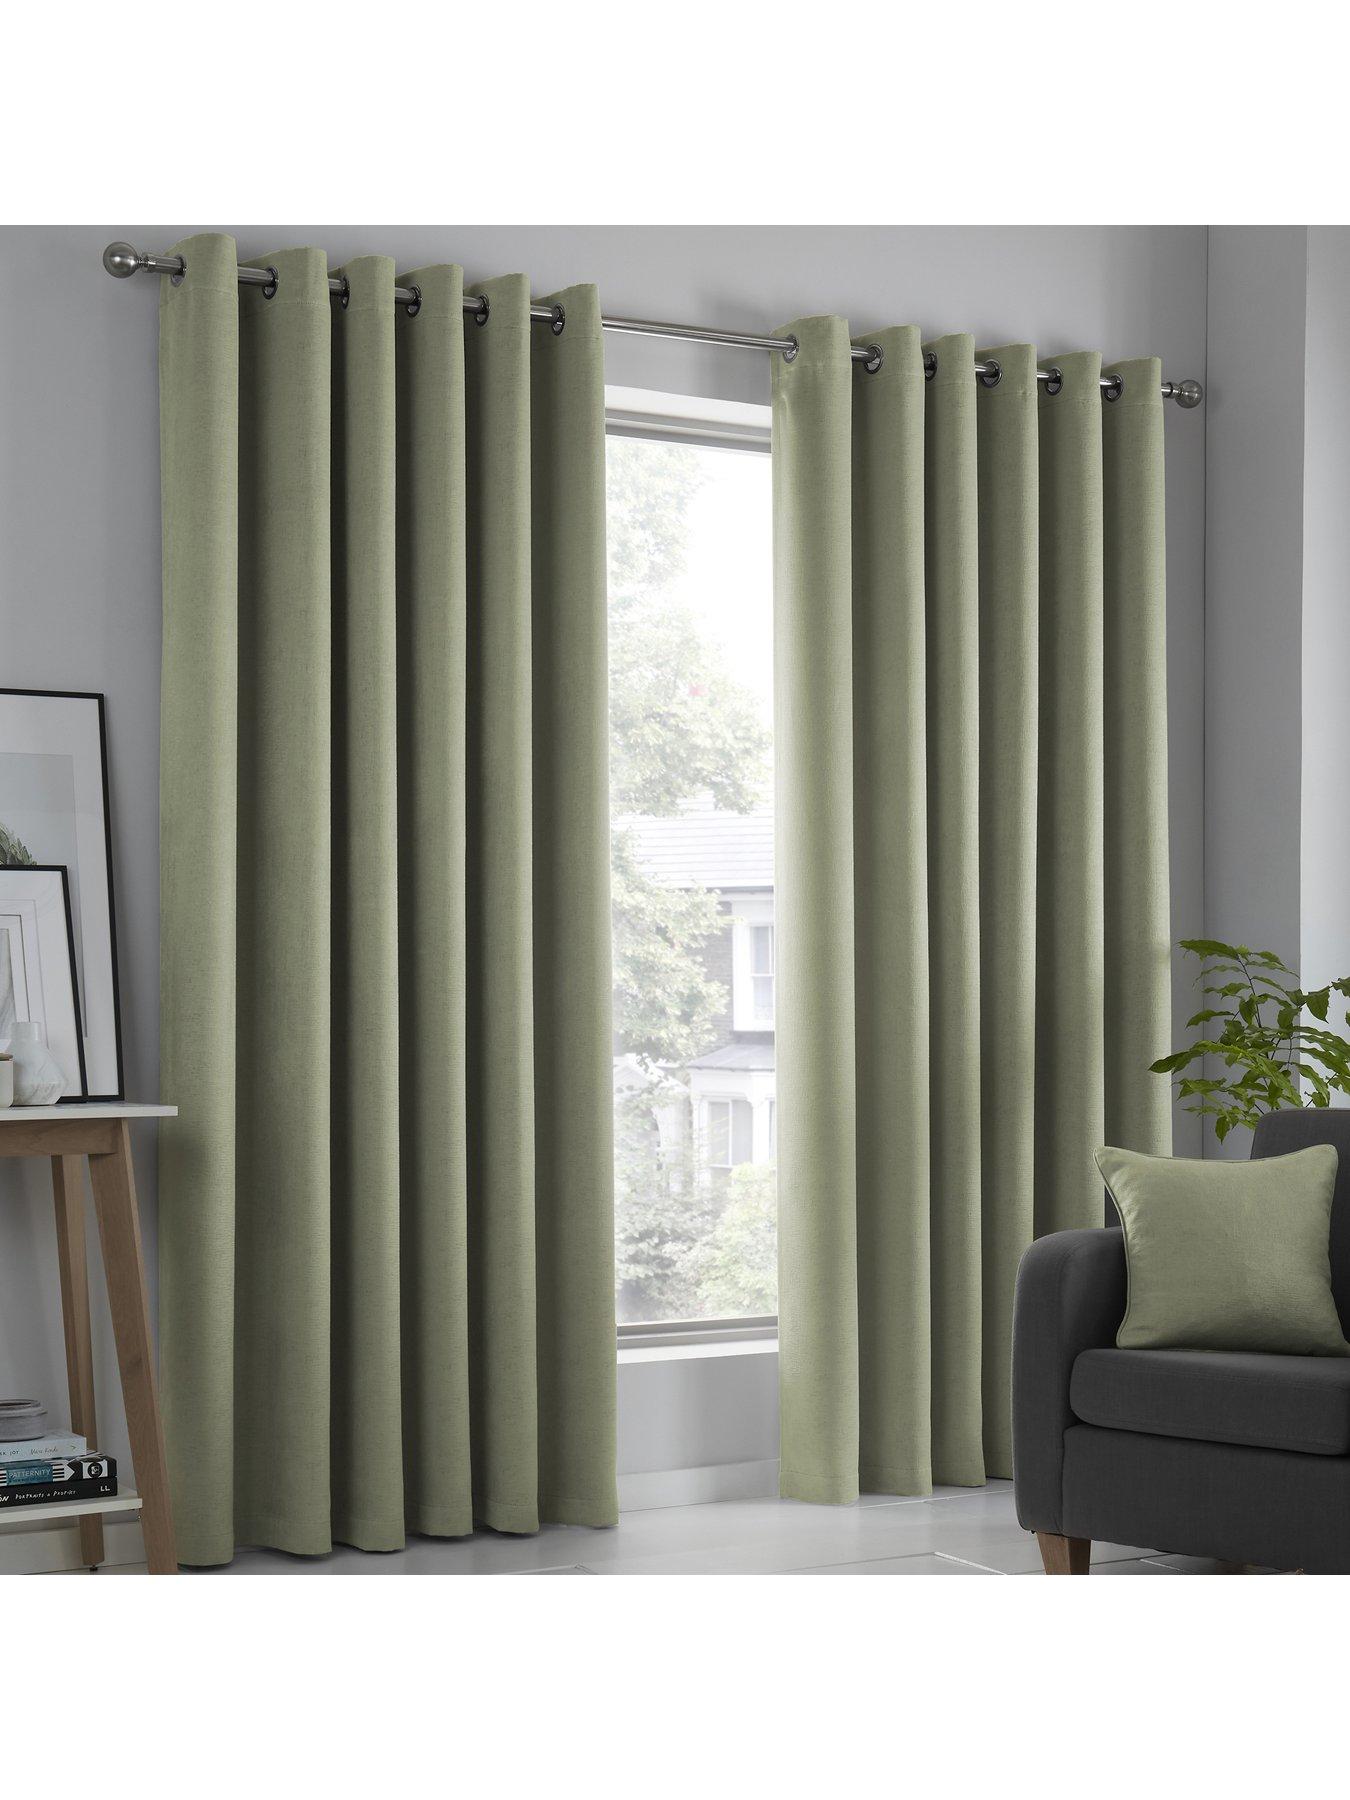 Fusion "Strata" Dim-Out/Block Out Semi-Plain Fully Lined Eyelet Curtains Blush 